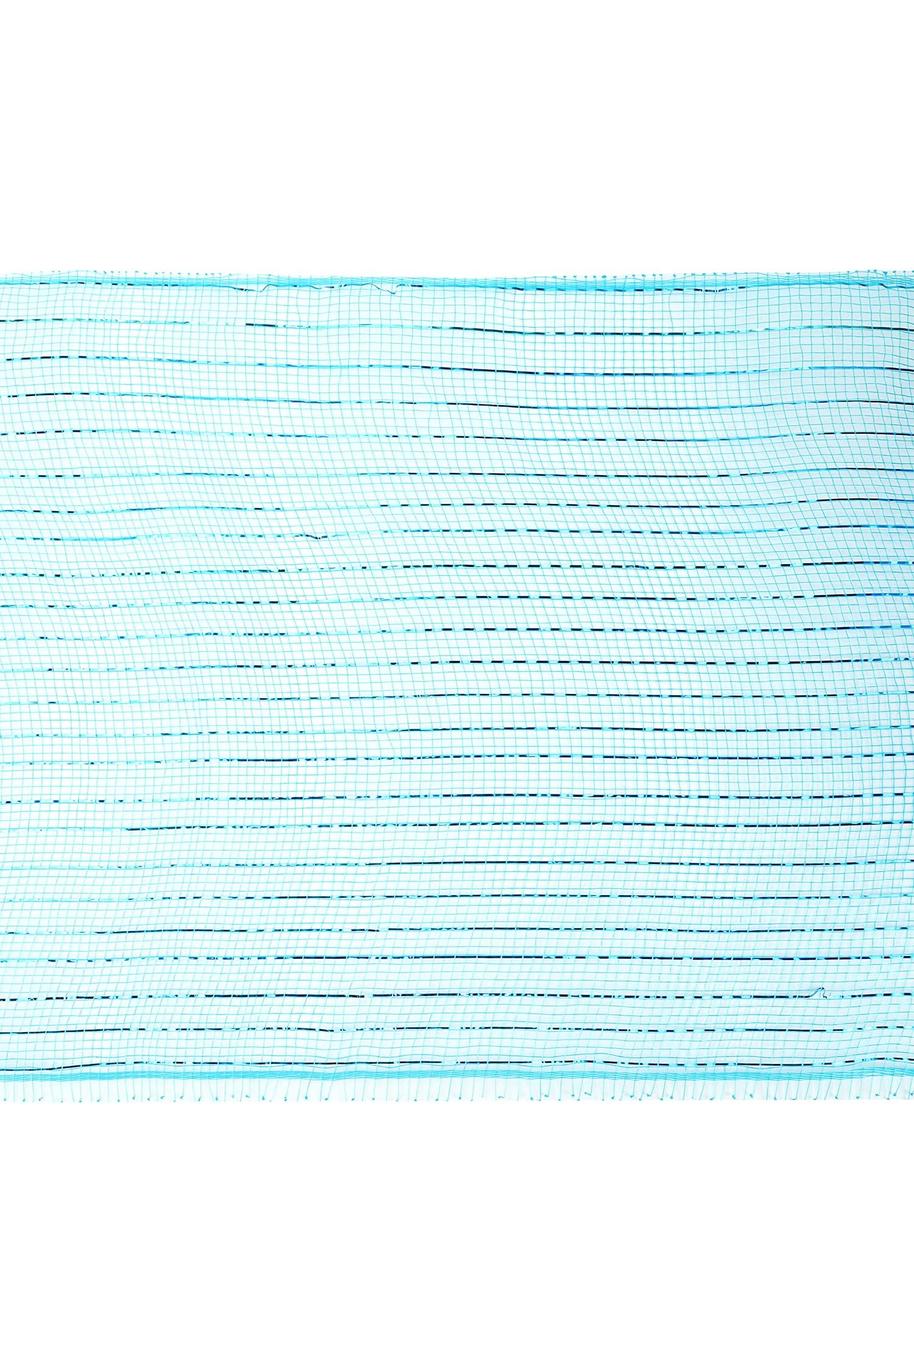 Shop For 10" Poly Deco Mesh: Metallic Turquoise (10 Yards) RE130144